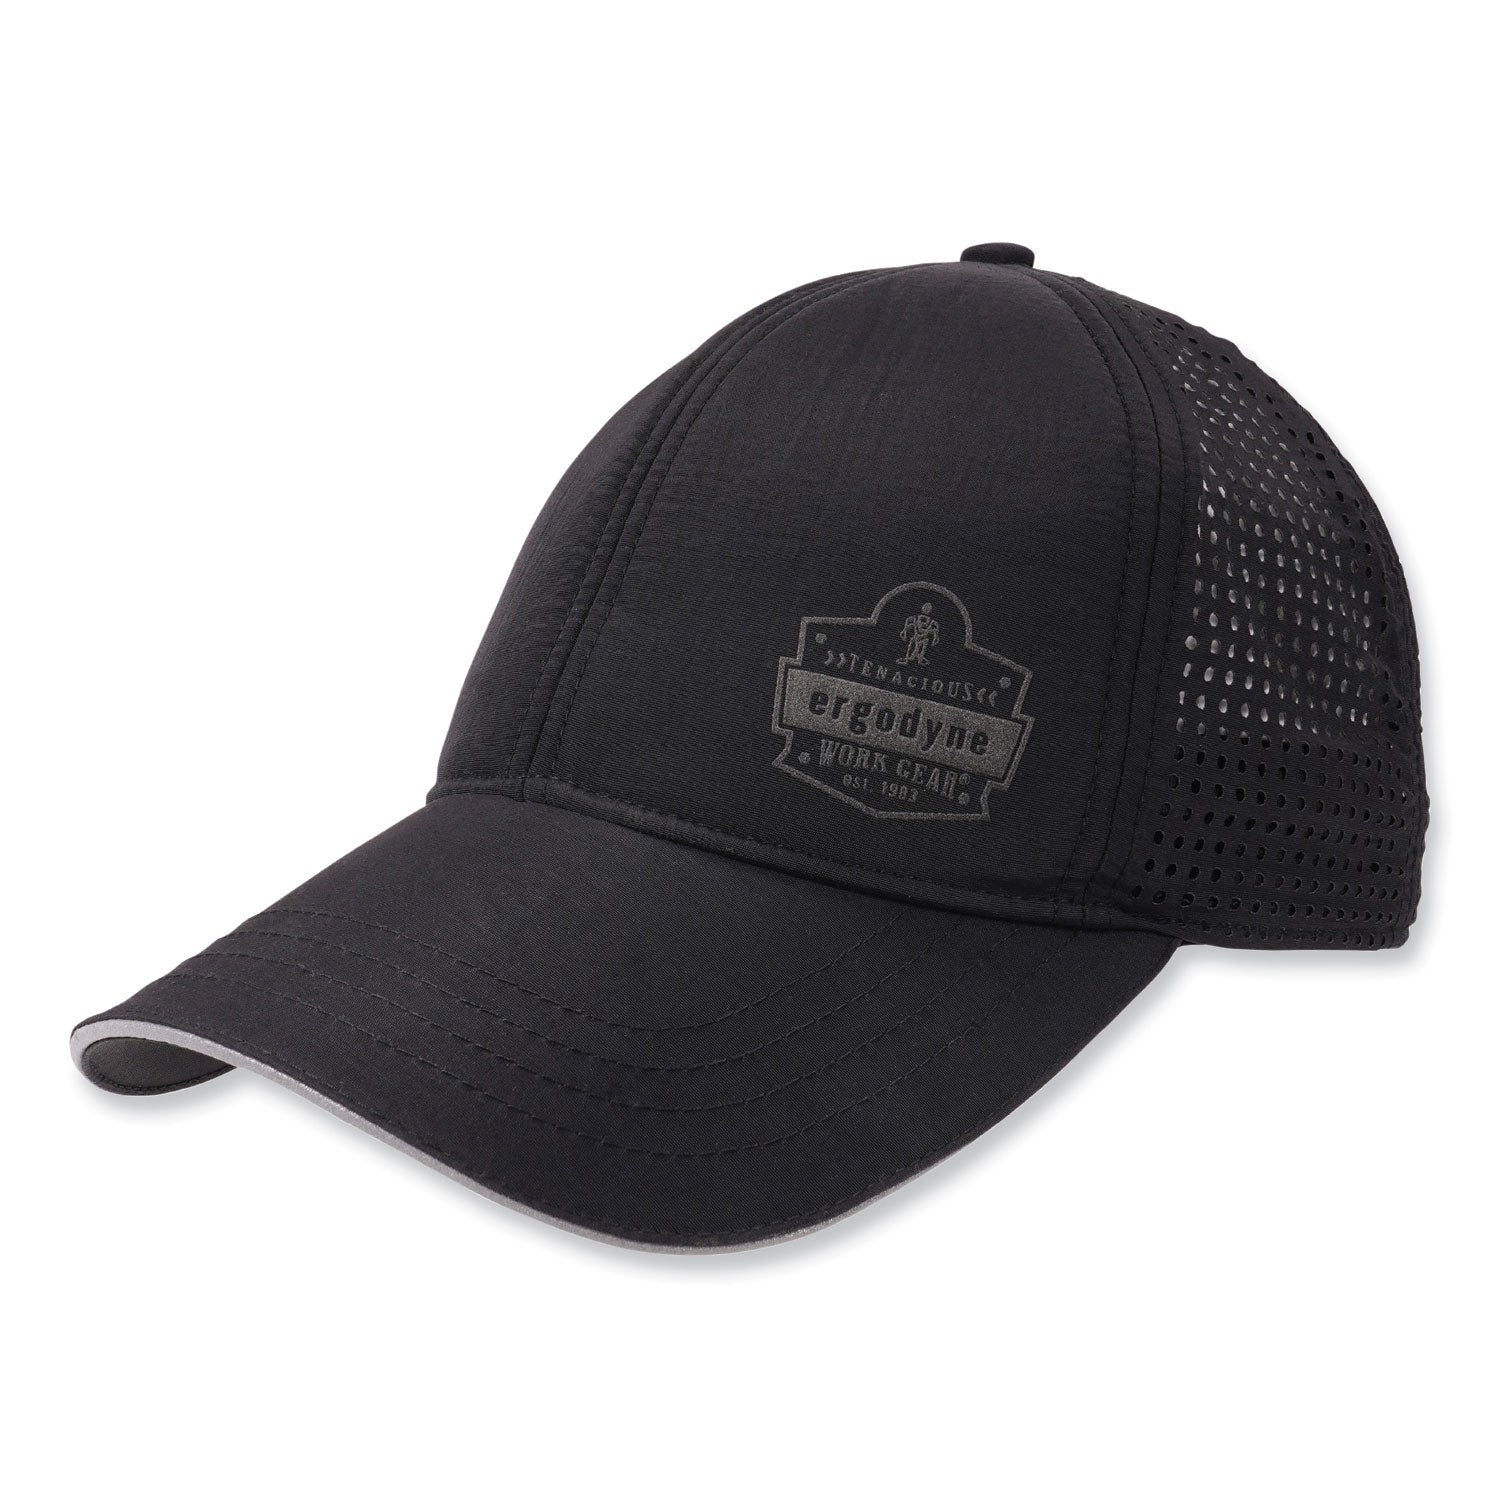 chill-its-8937-performance-cooling-baseball-hat-one-size-fits-most-black-ships-in-1-3-business-days_ego12604 - 1